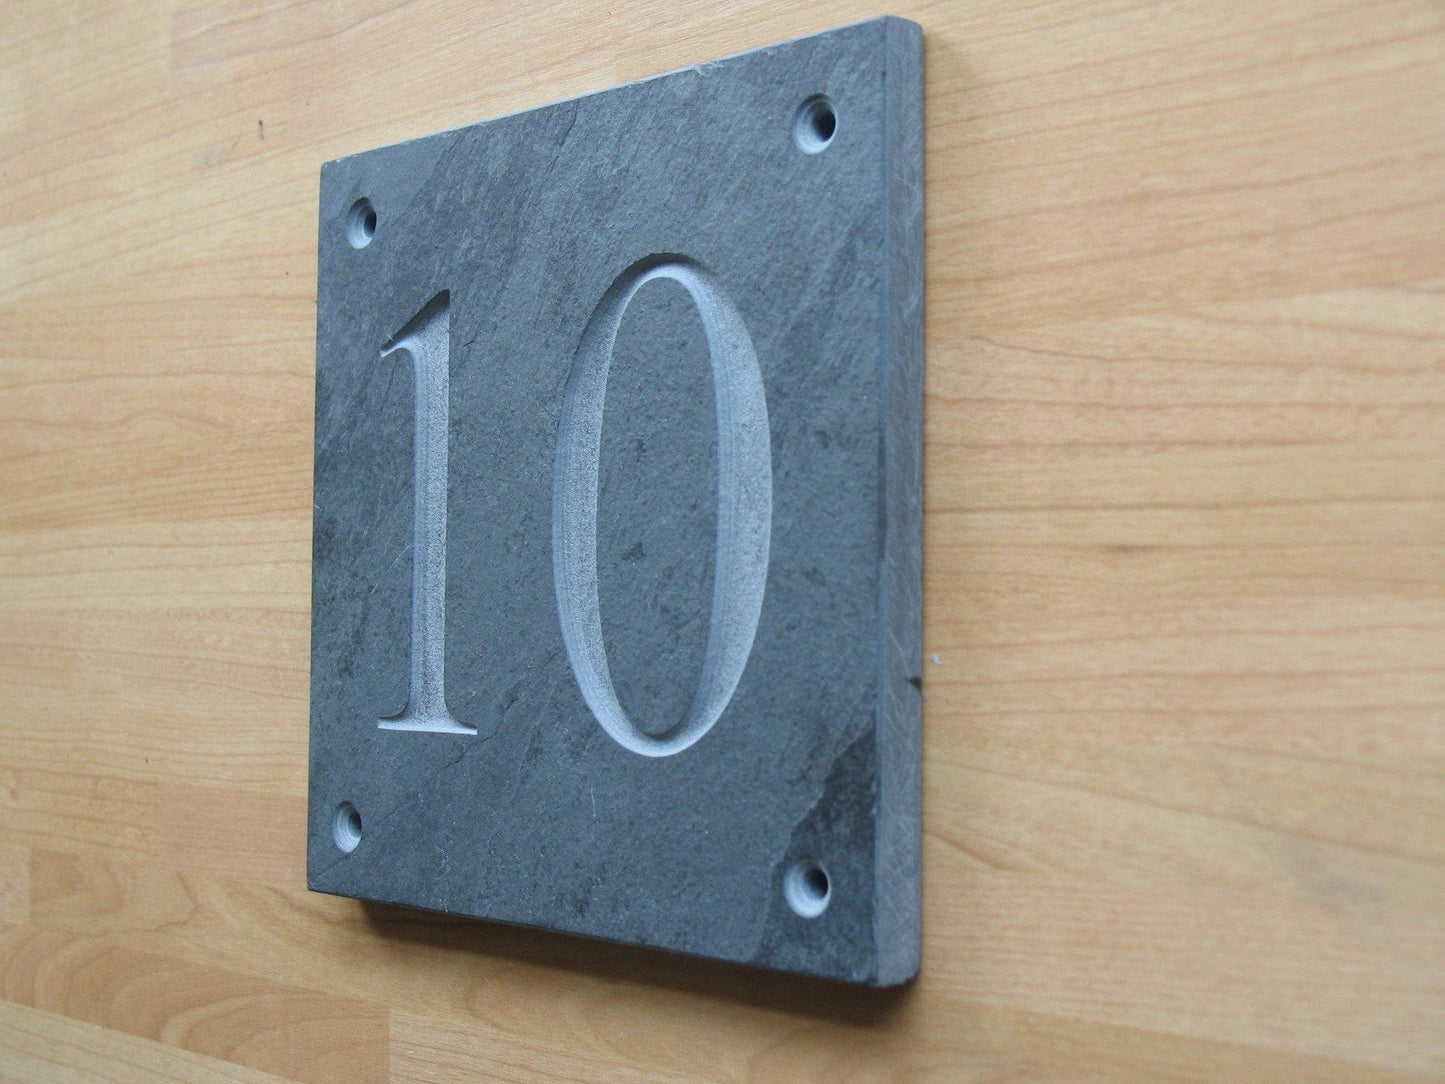 Slate house sign with house number 10 on a 100mm x 100mm  using Times New Roman font -on grey slate with no paint